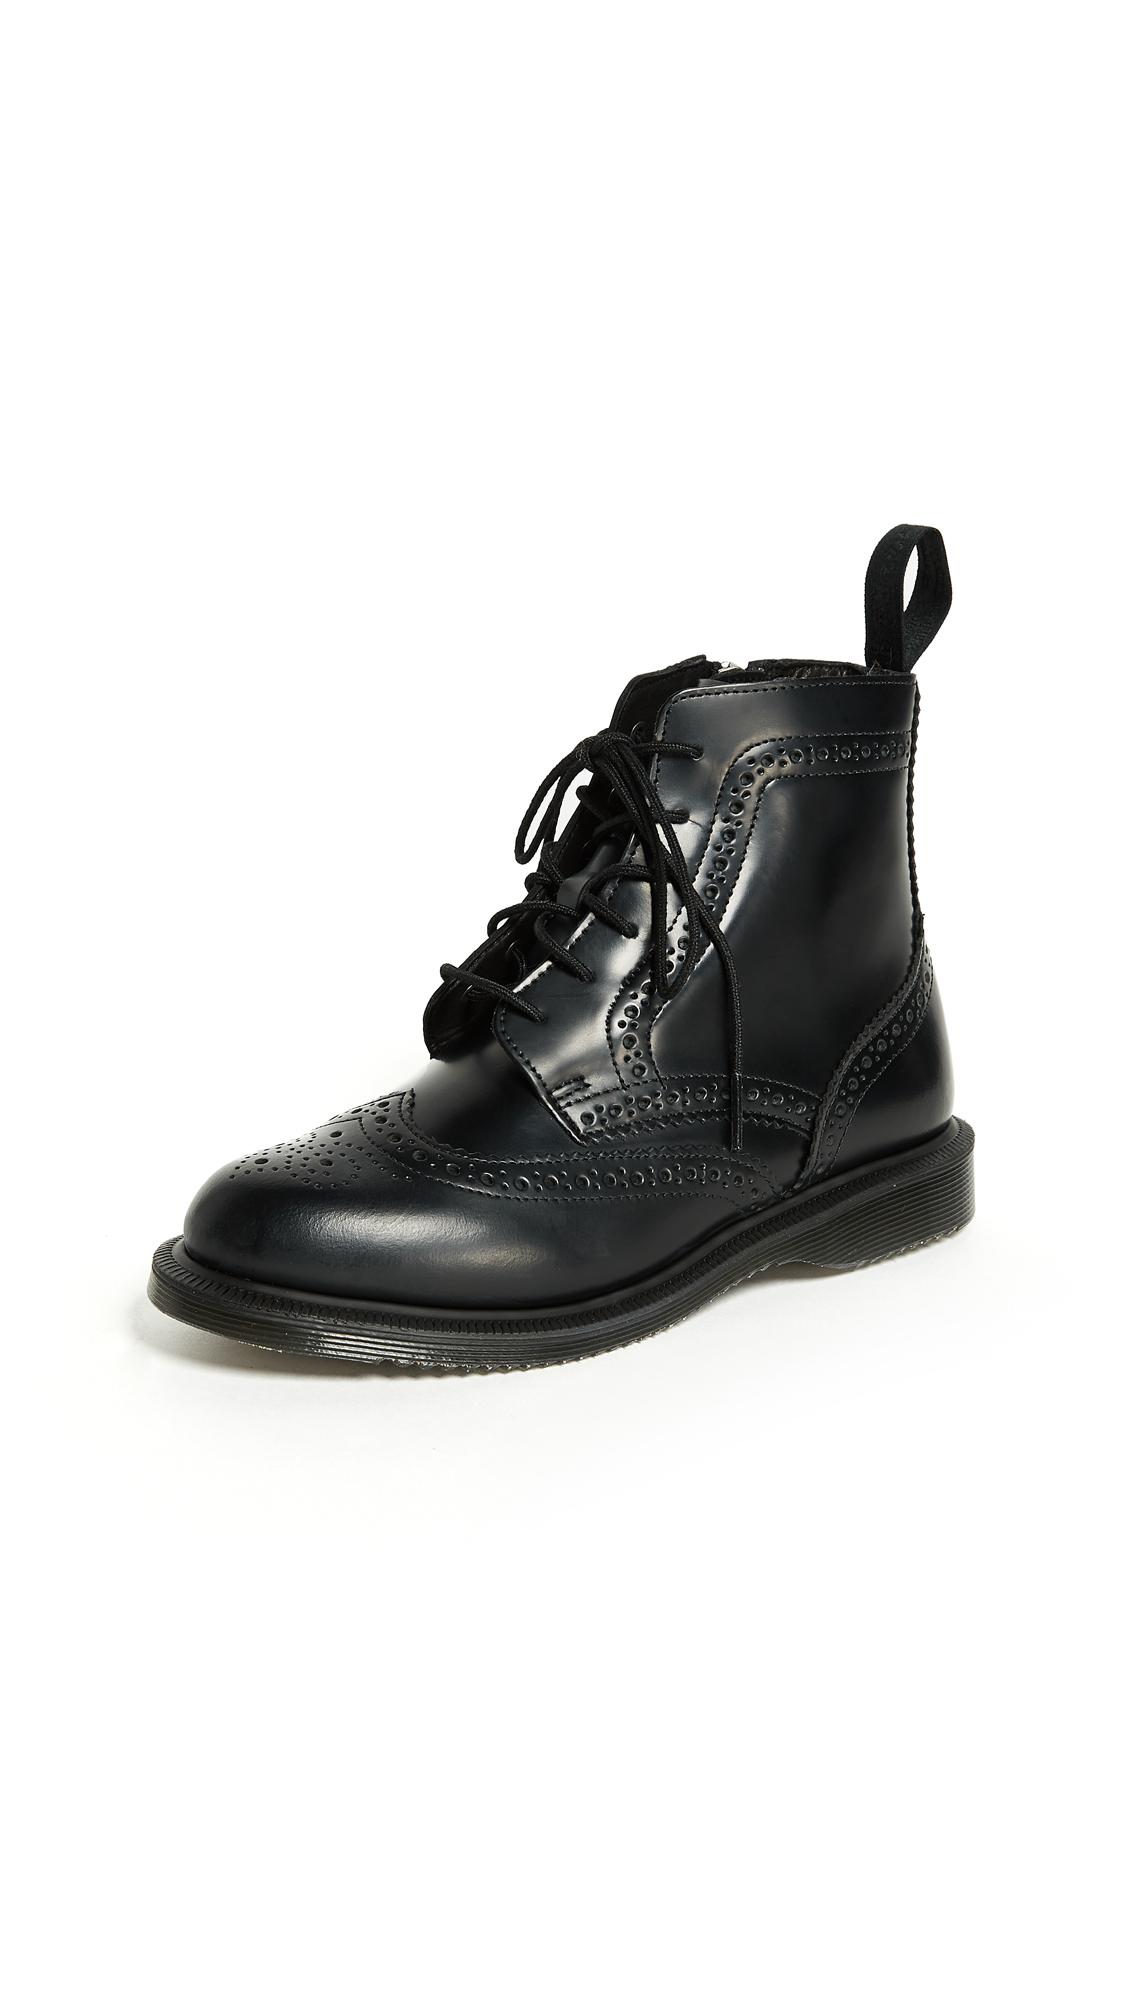 Dr. Martens Leather Delphine 8-eye Brogue Boot in Black | Lyst Canada